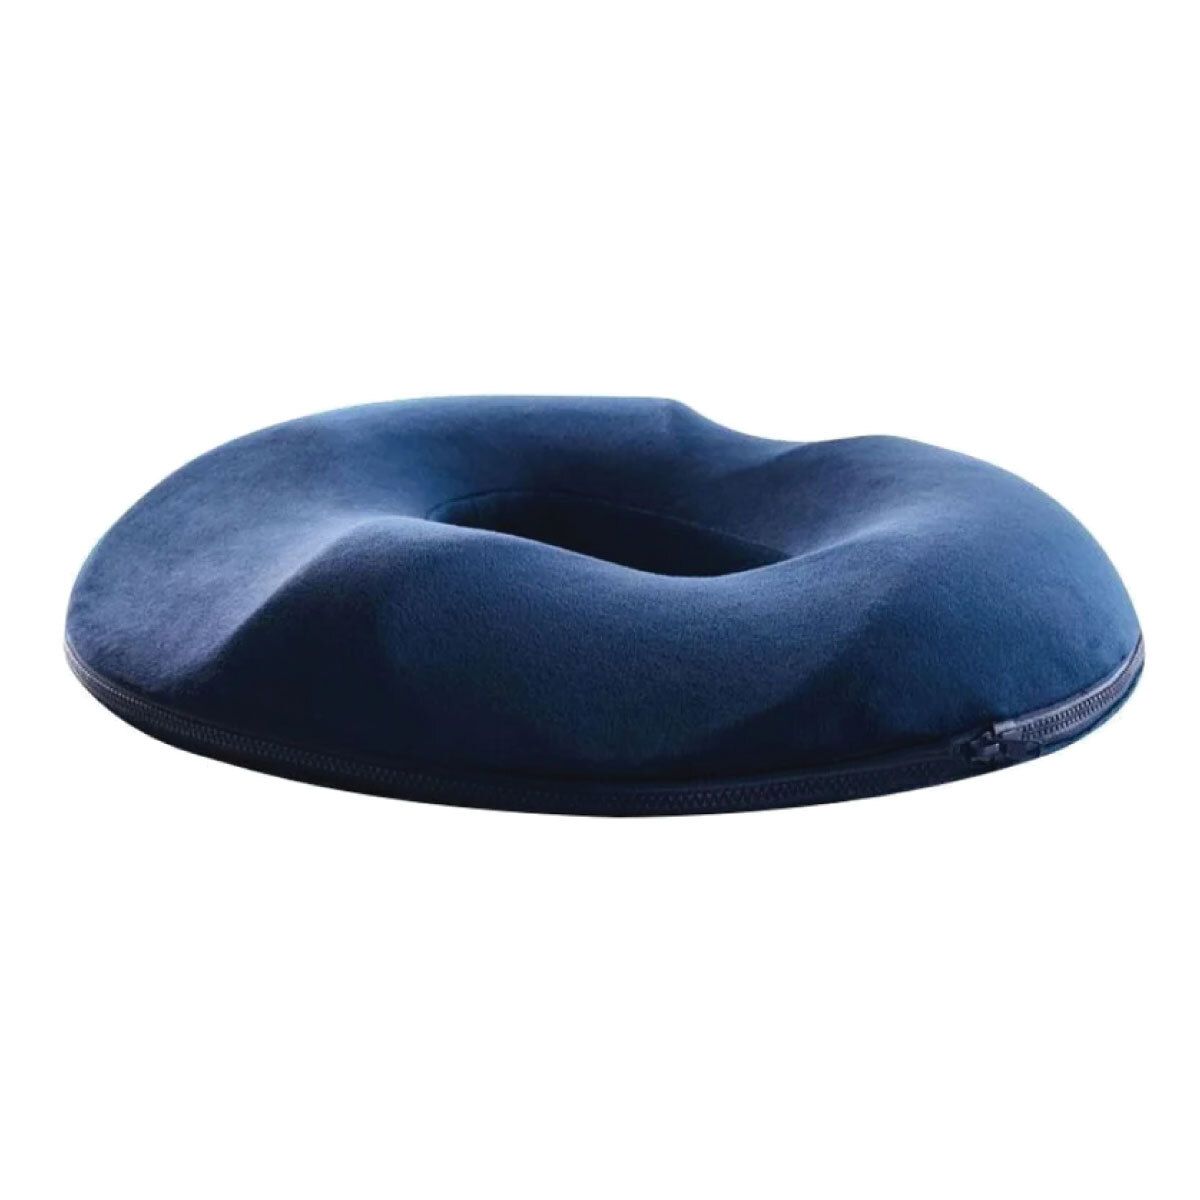 https://www.medipost.shop/media/catalog/product/cache/f6298cf2505a77a123c409691650ce25/C/o/Coussin-Coccyx-Donut_M01.jpg